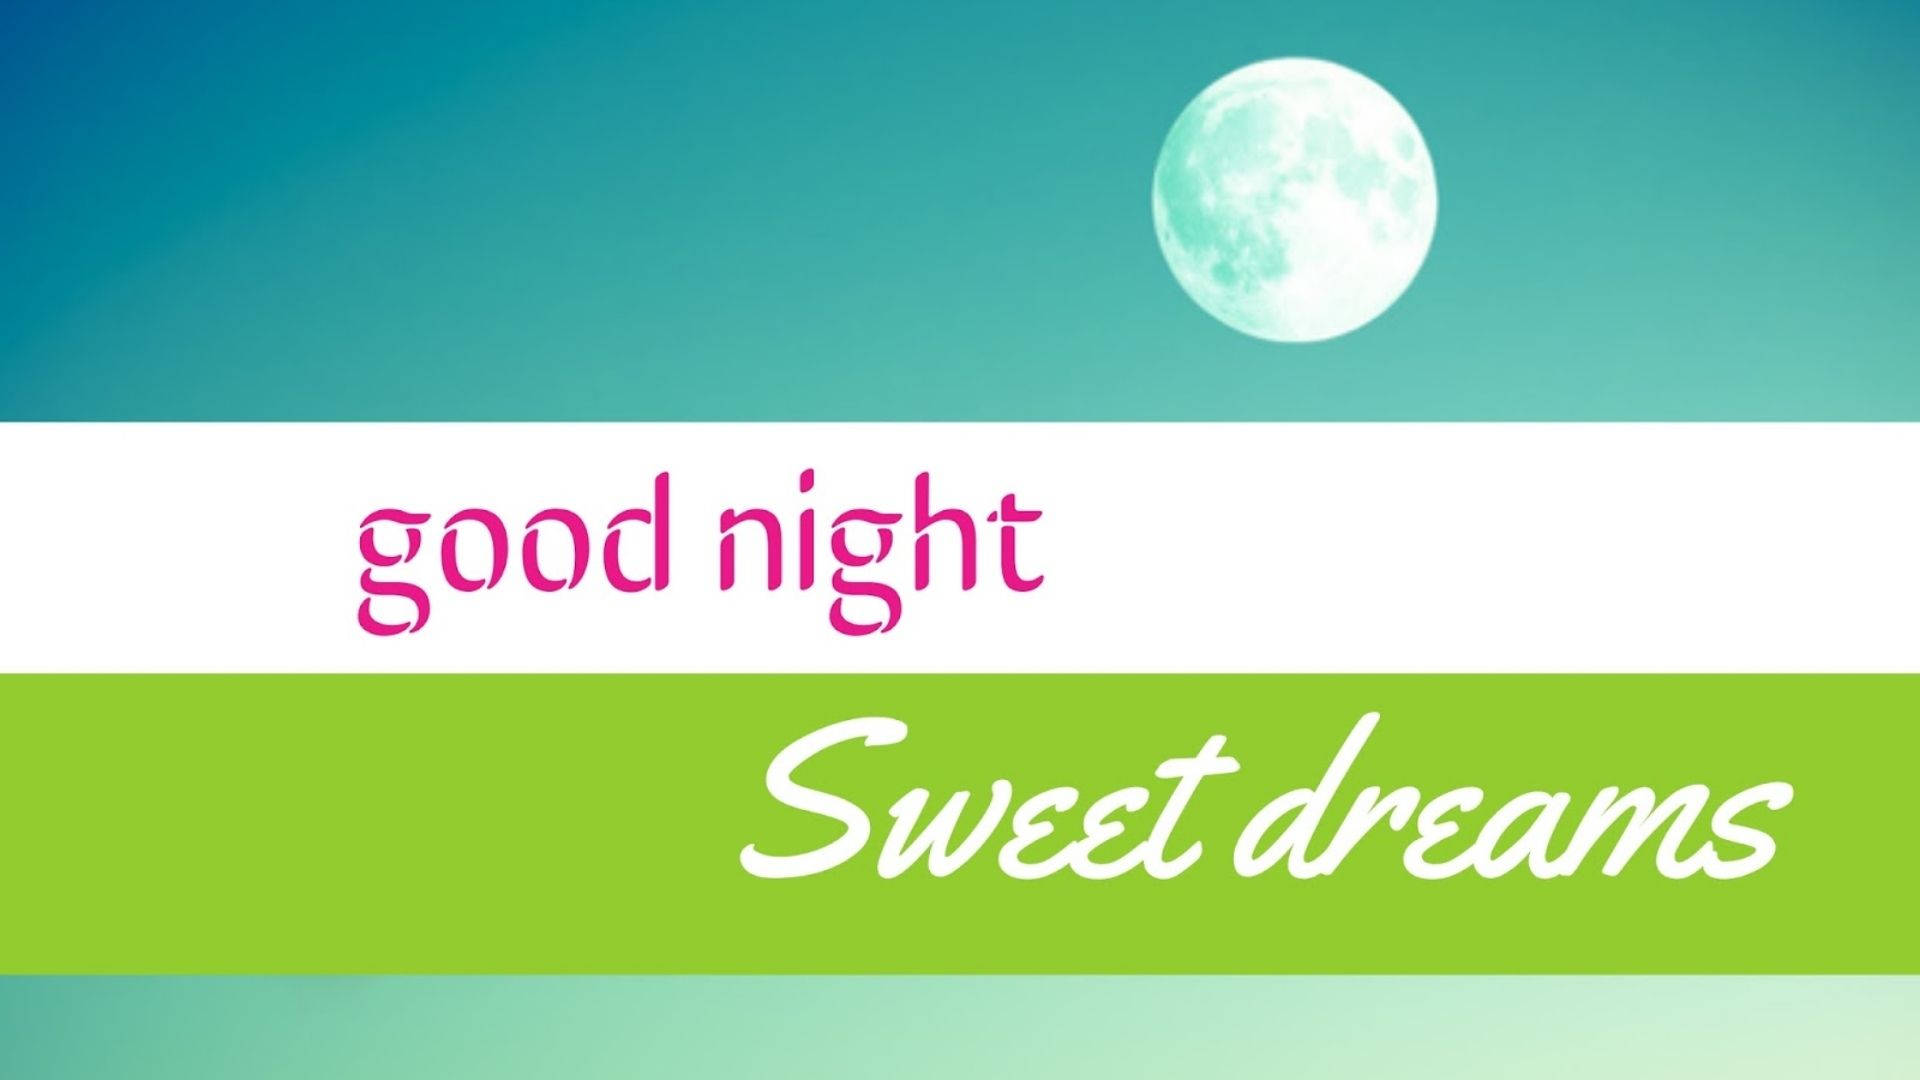 Sweet Dreams On Green Horizontal Background